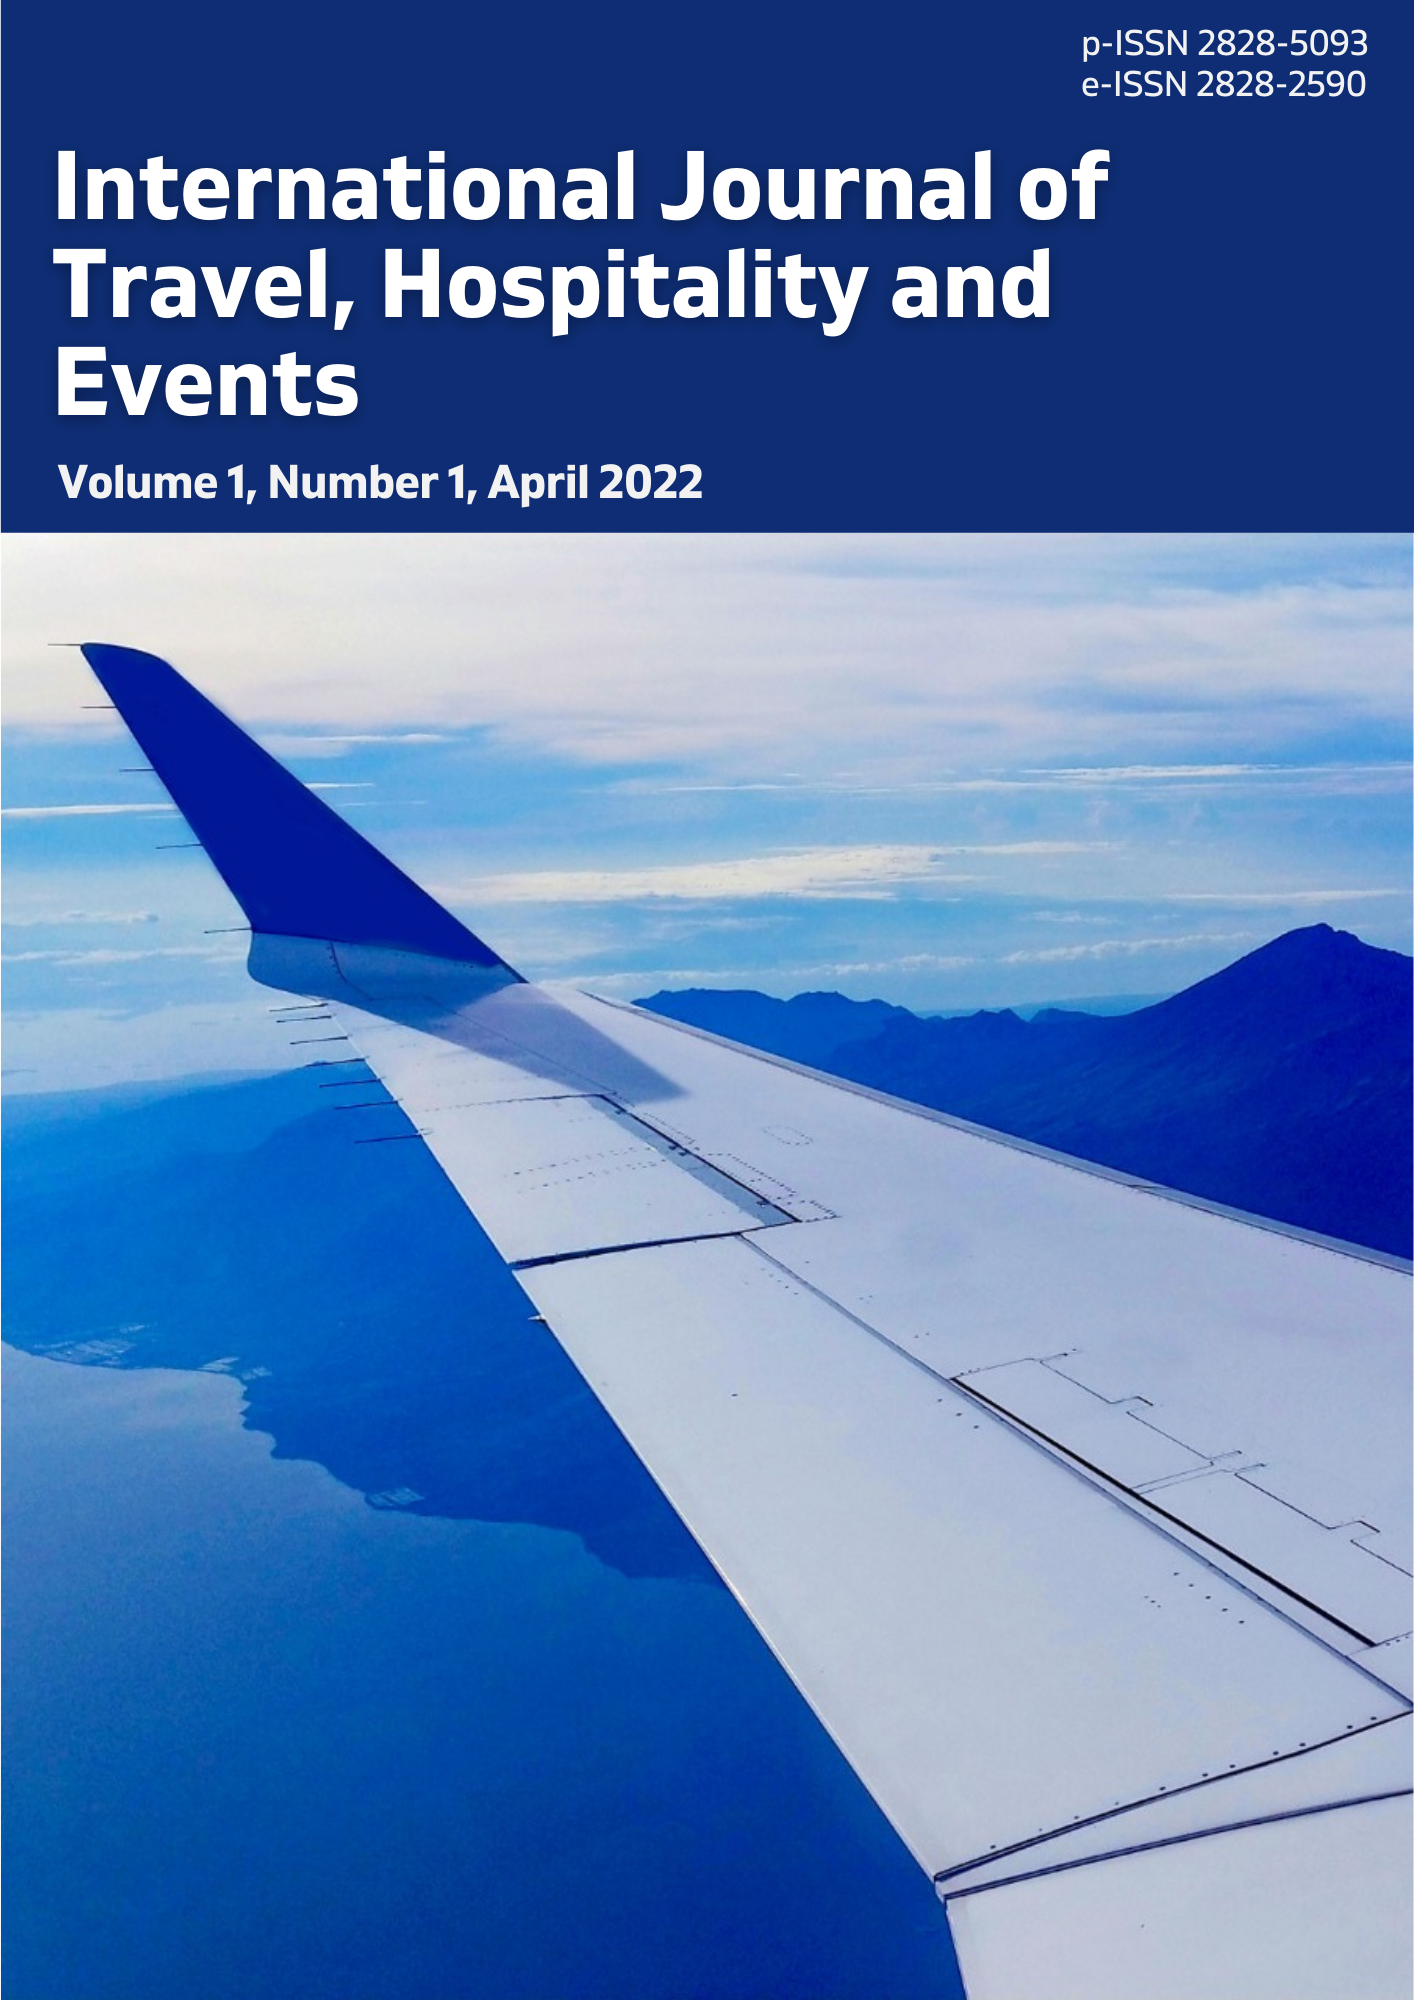 International Journal of Travel, Hospitality and Events